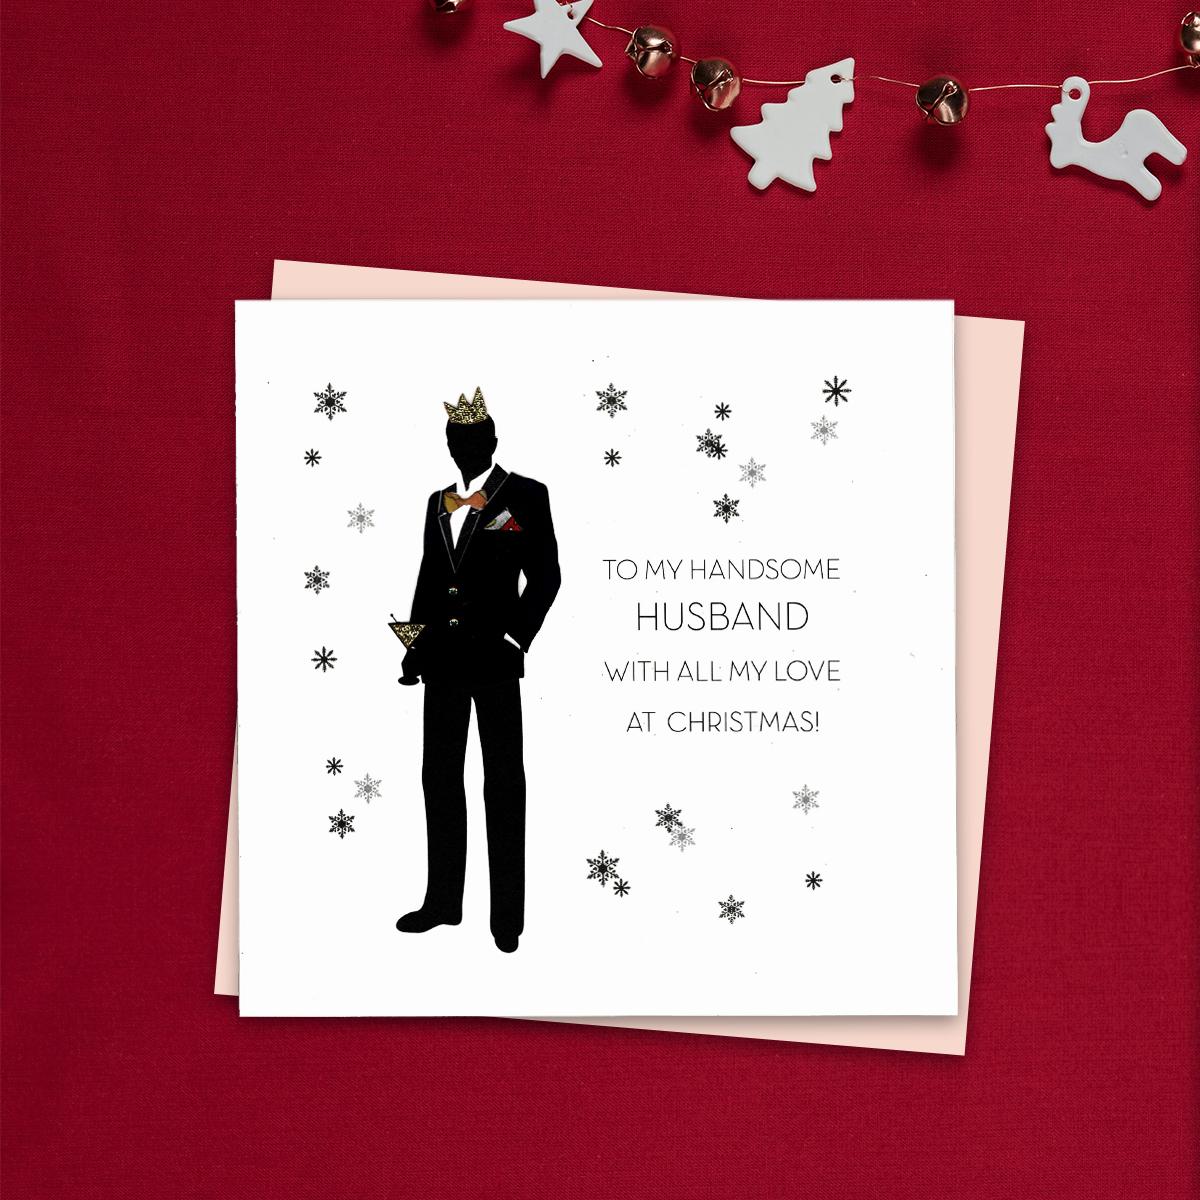 To My Handsome husband With All My Love At Christmas Featuring a Man In Silhouette, Dressed To Kill And Ready To Party! Gold Glitter detail And jewel Embellishments Complete This Stunning, Handcrafted Design. Blush Coloured Envelope And Blank Inside For Your Own Message.